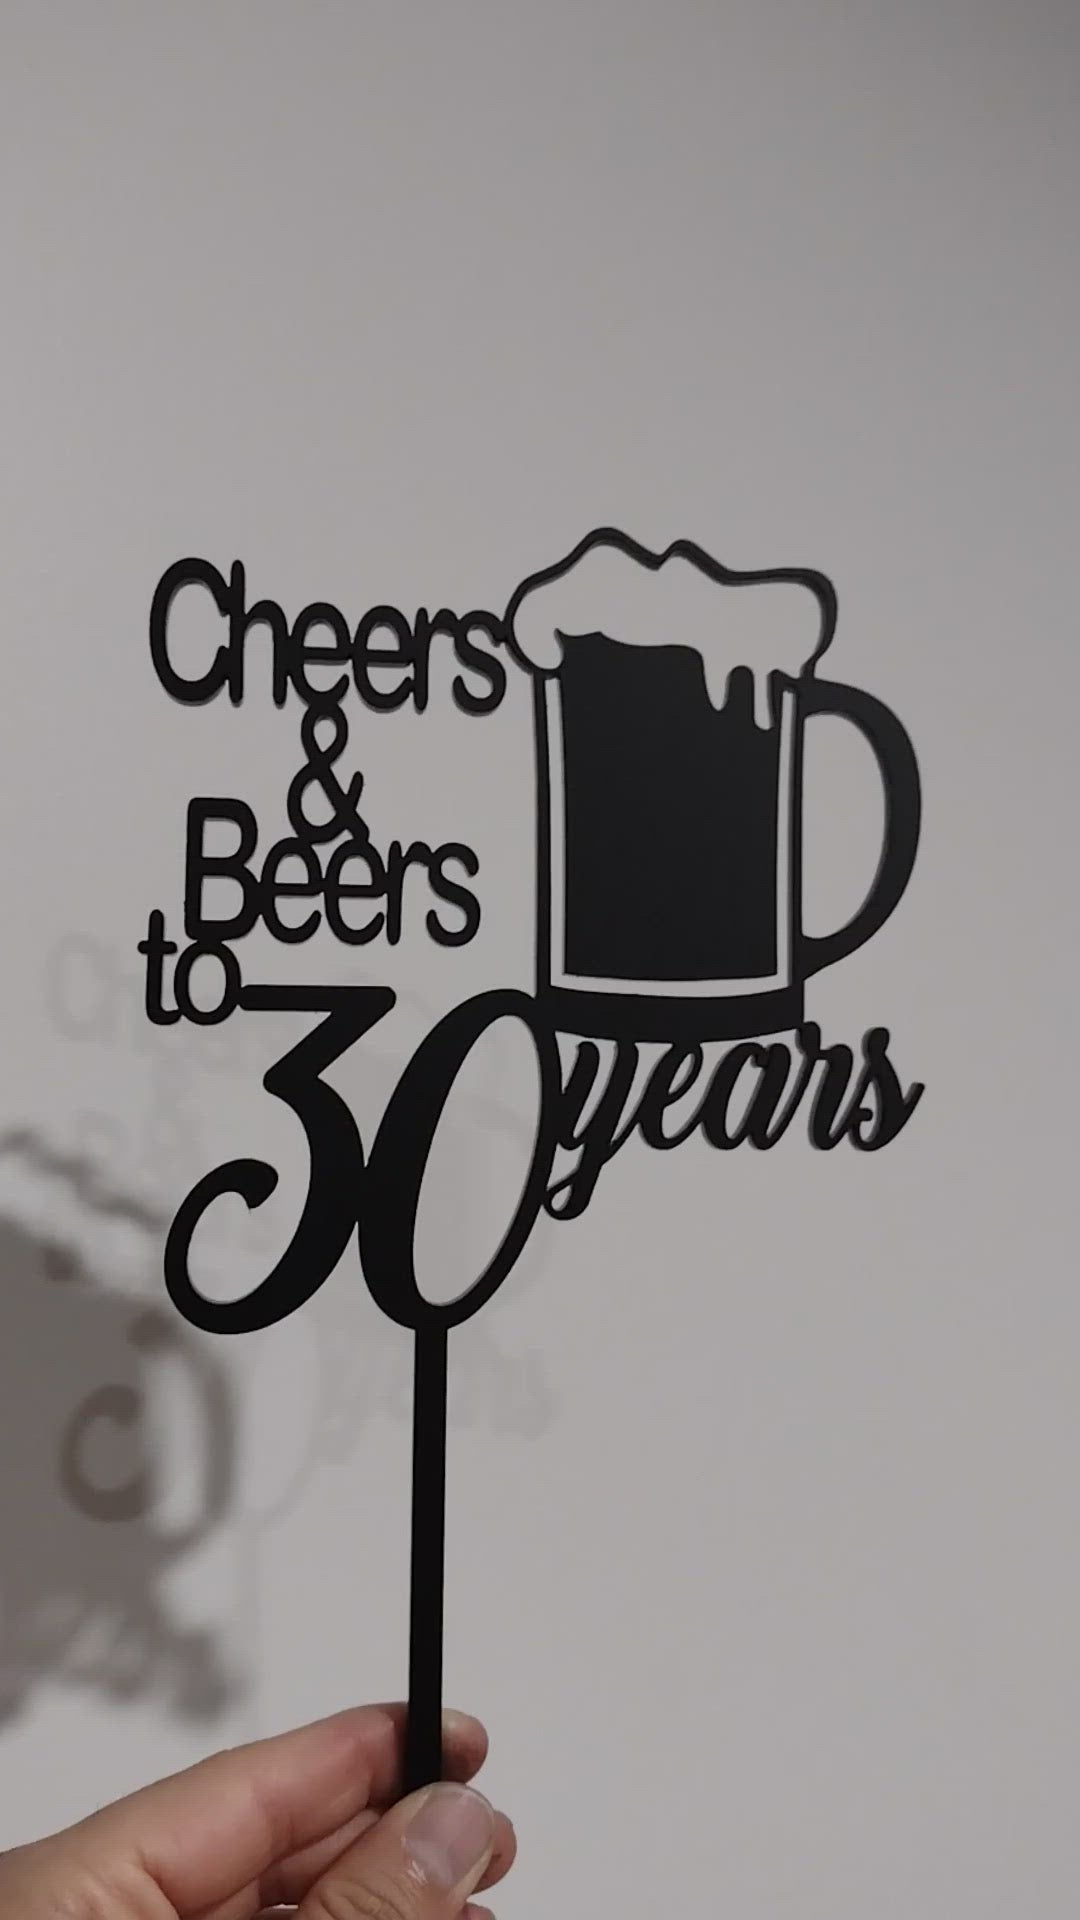 Cheers and Beers to + Age + years Cake Topper